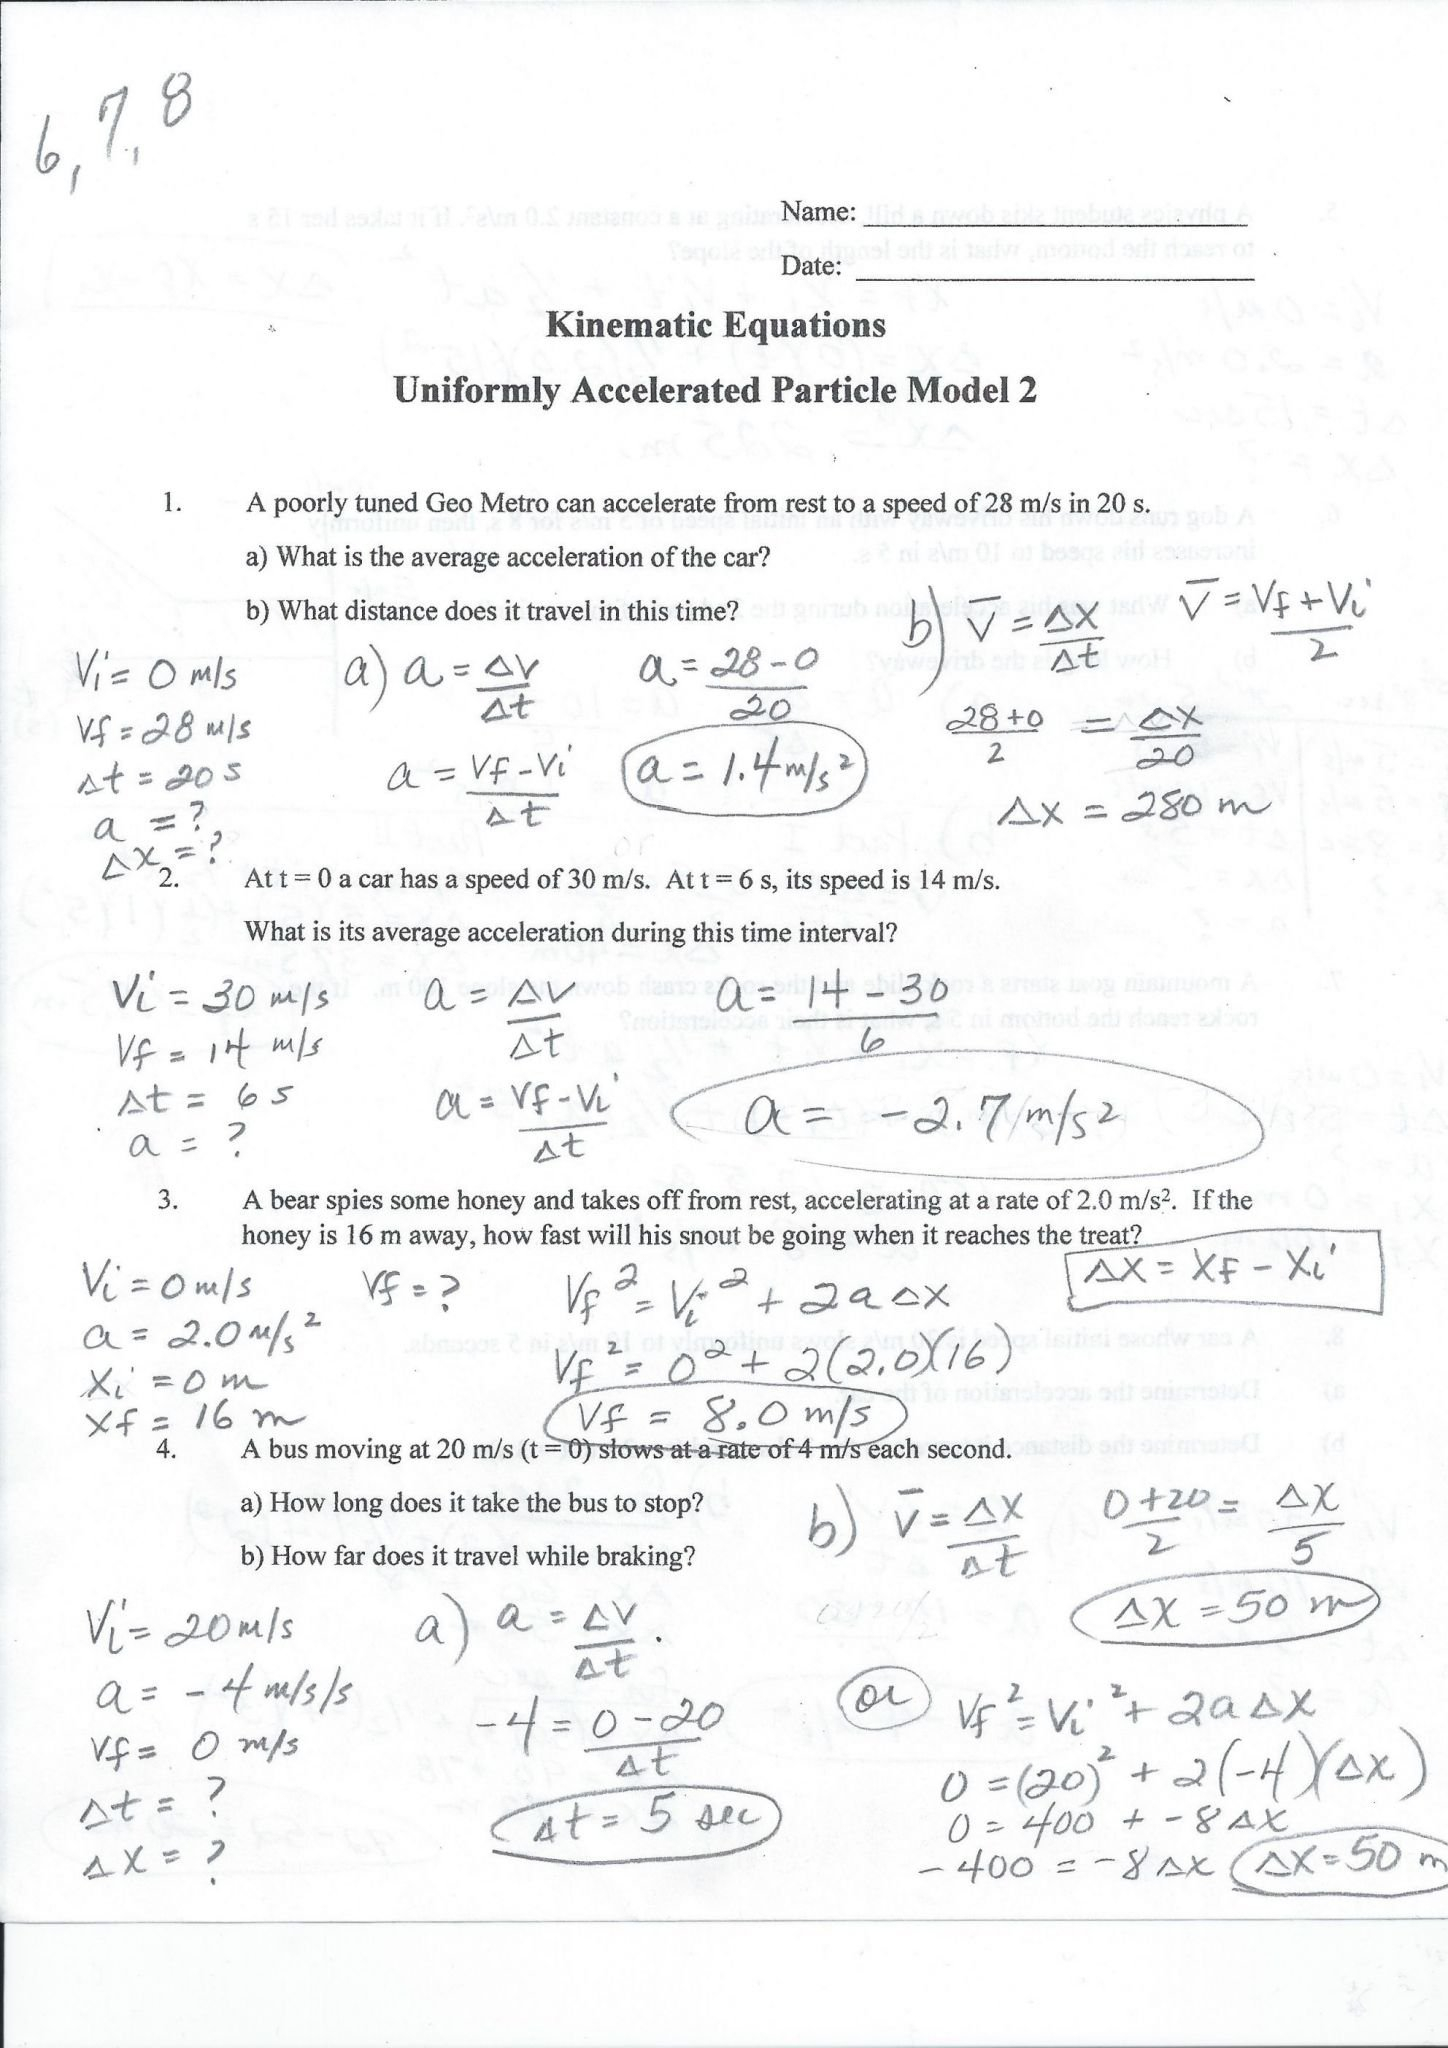 Speed Velocity And Acceleration Calculations Worksheet Answers Key Or Speed Velocity And Acceleration Calculations Worksheet Answers Key